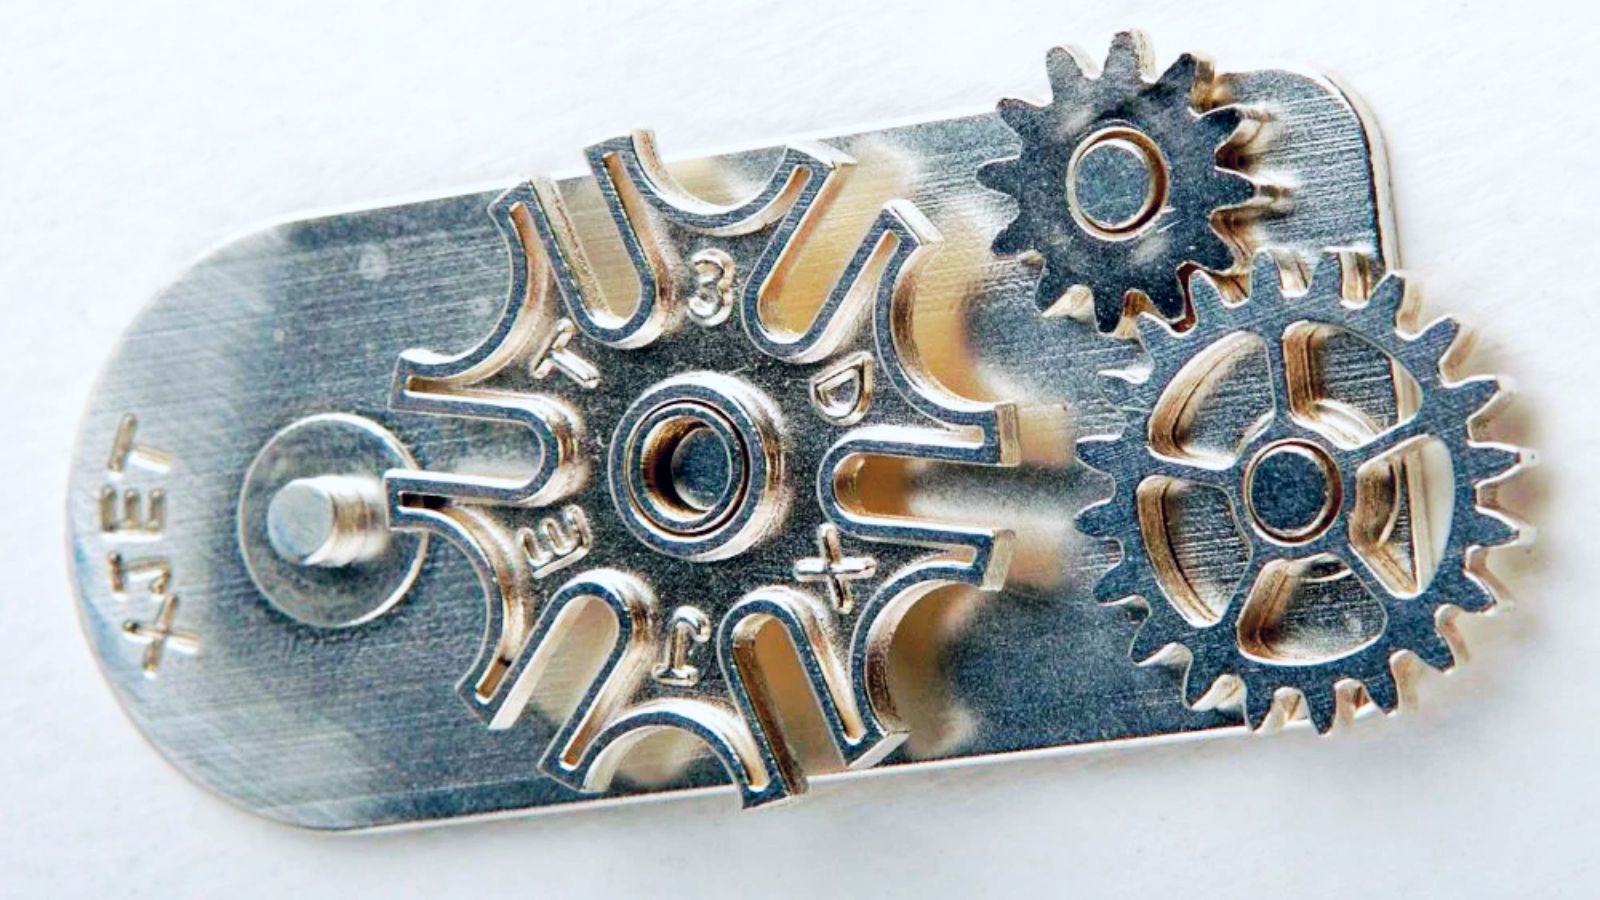 Pedal to the Metal: New Metal 3D Printing Systems Are Picking Up Speed